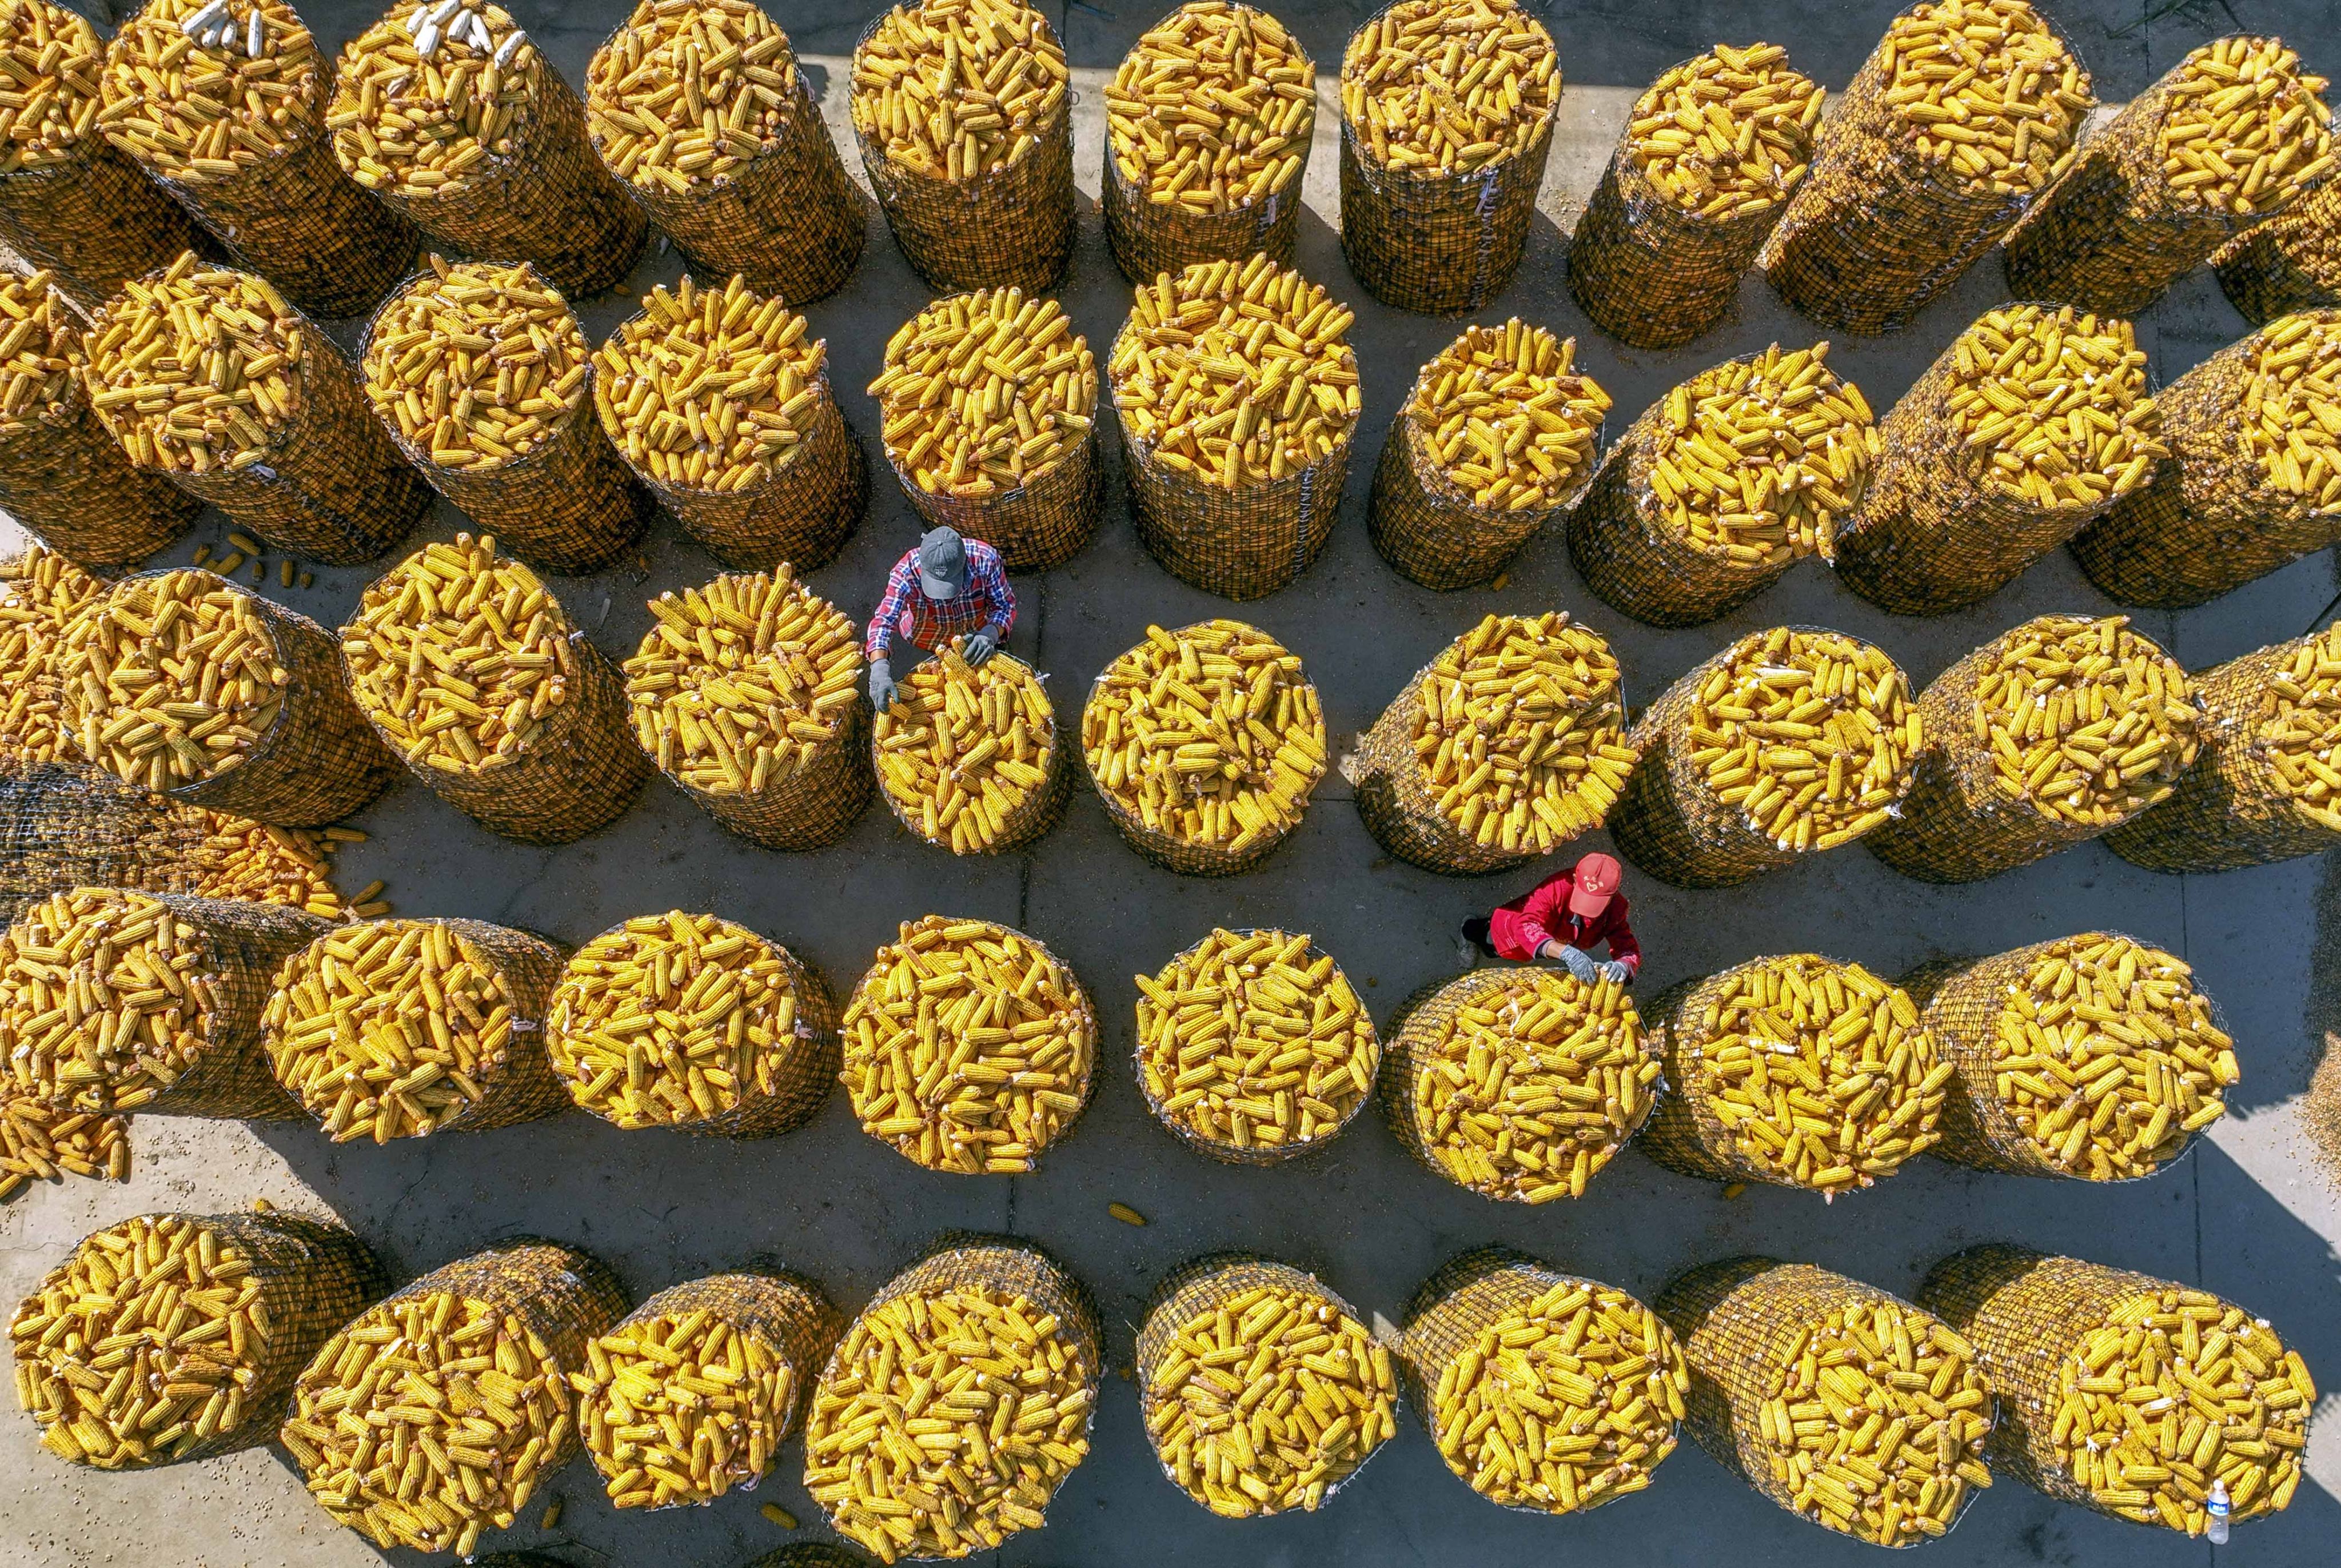 China has played up the importance of guaranteeing food security for its 1.4 billion population and avoiding any unnecessary loss in recent years. Photo: Xinhau